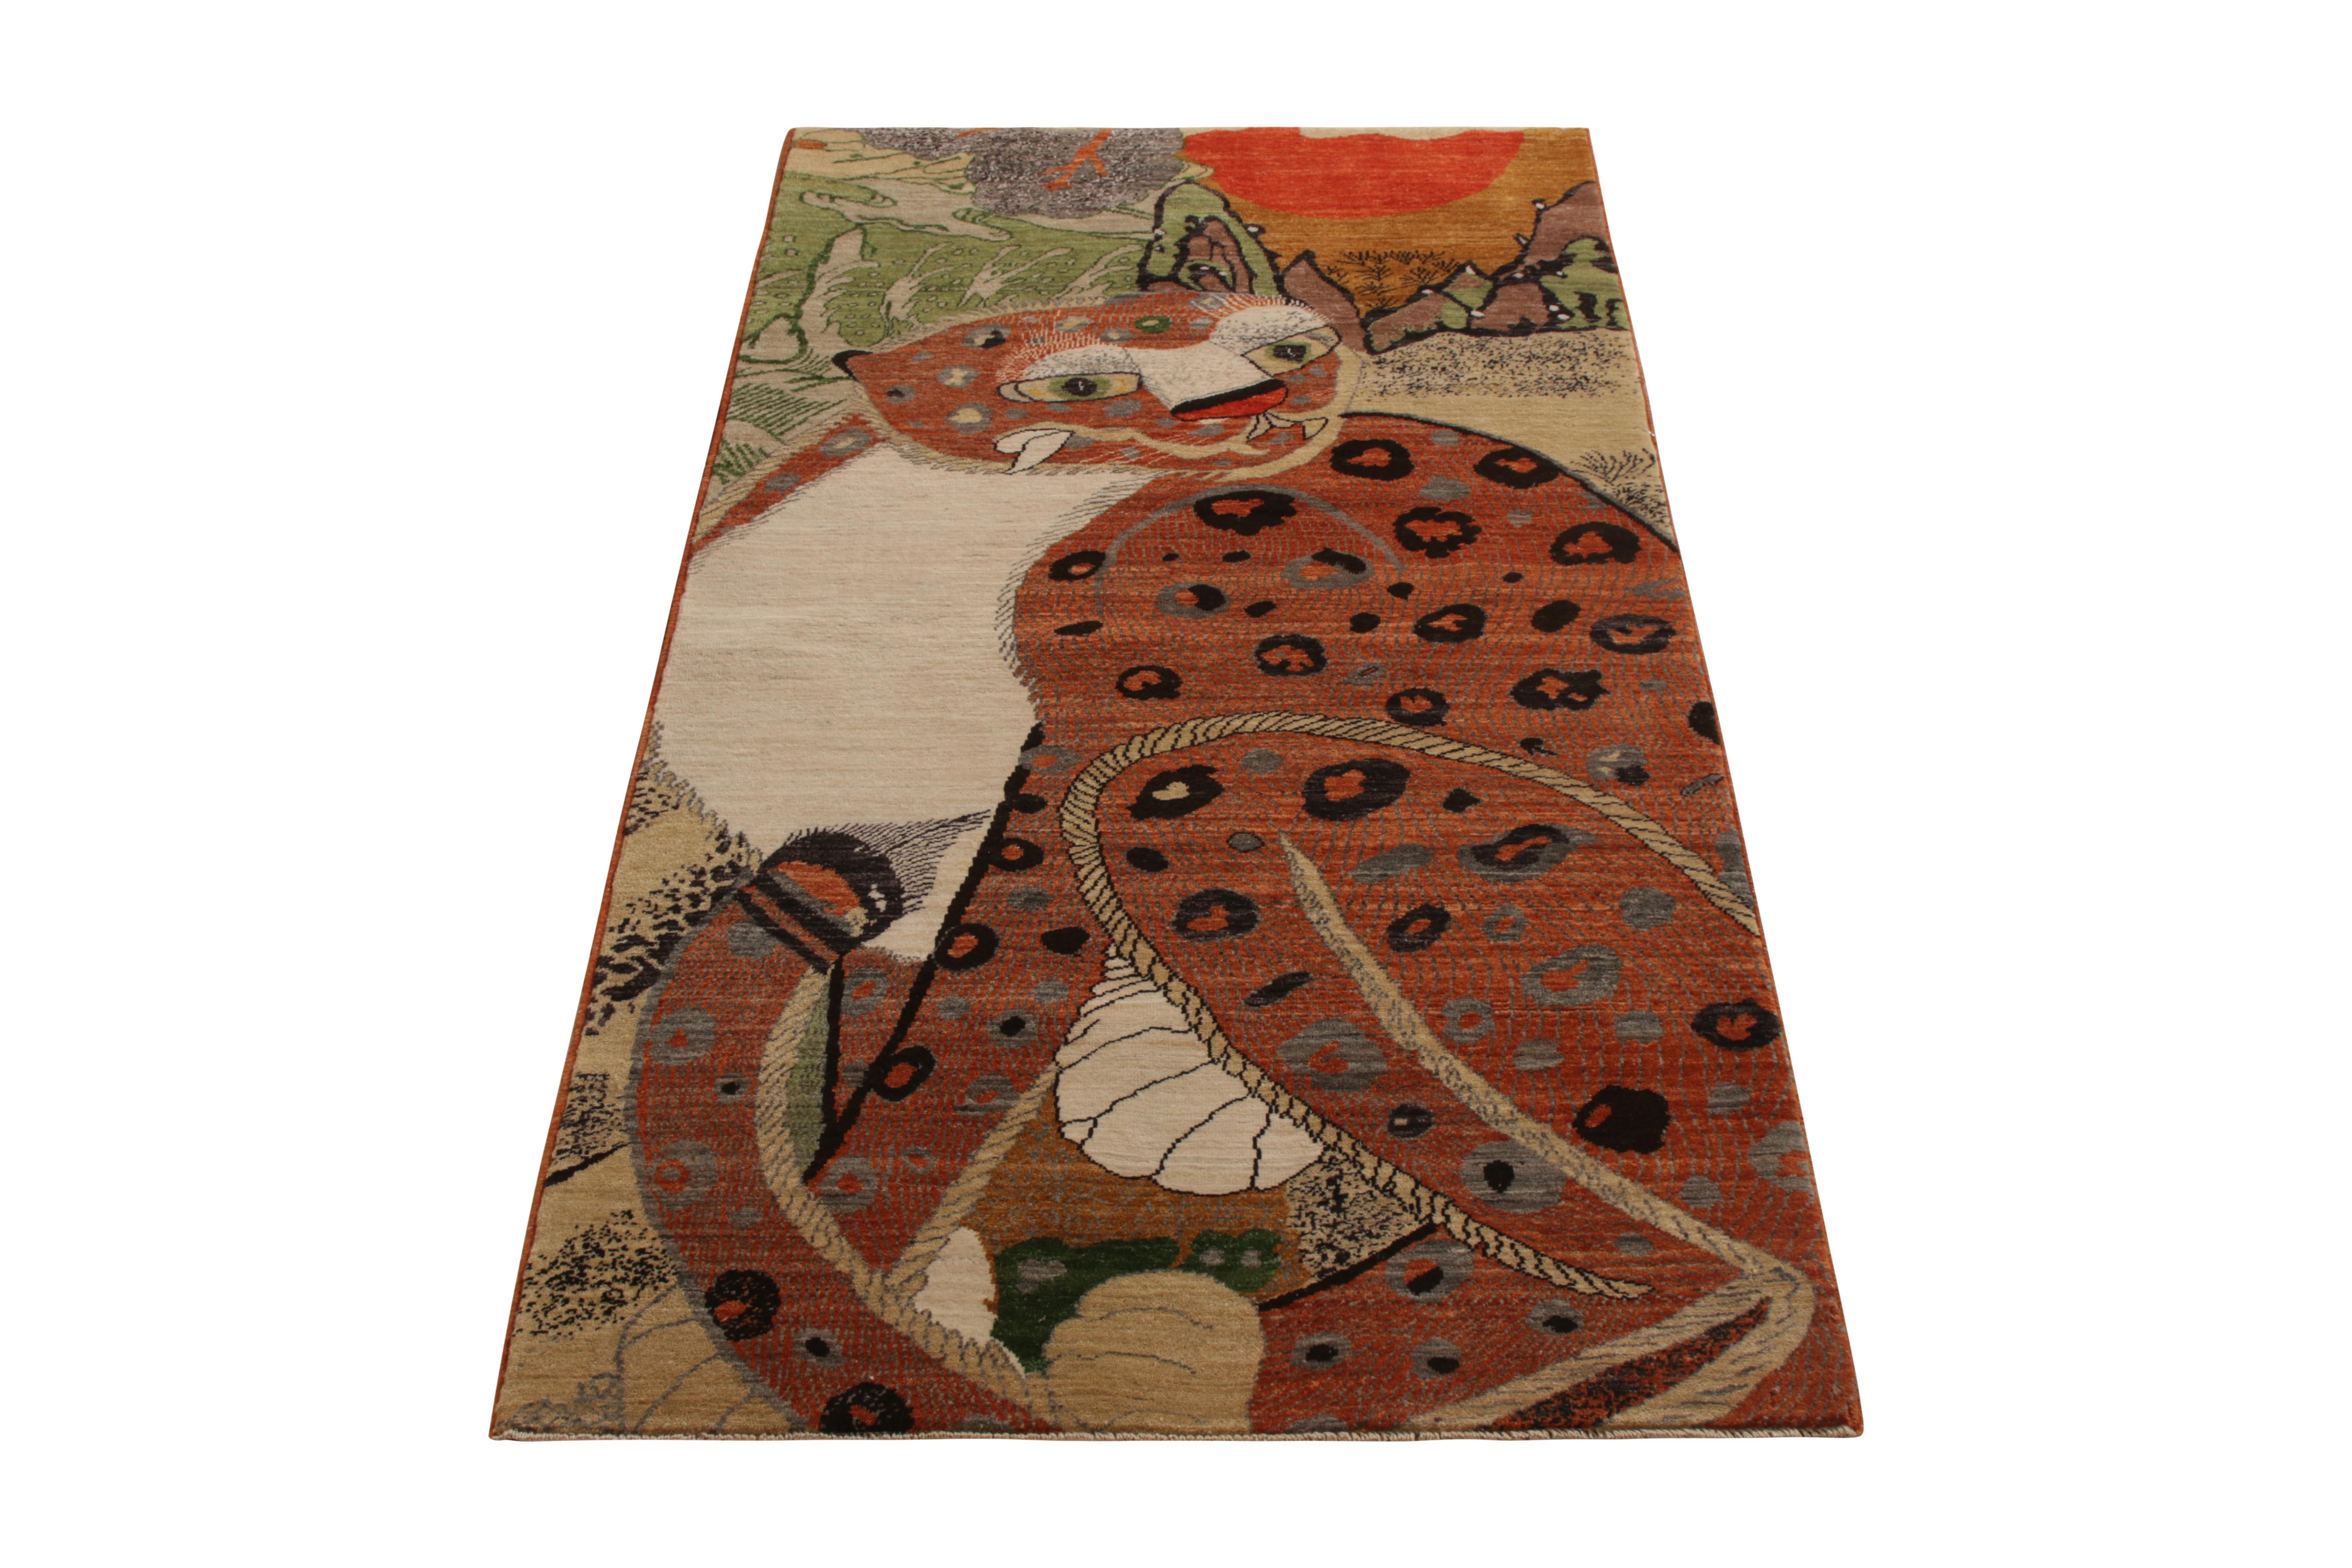 An ode to classic Oriental Tiger styles from the titular new collection by Rug & Kilim. Hand knotted in wool, available in 11-12 weeks upon request in all color and size variations. 

On the design: Heavily inspired by folk art, this 3xg Tiger rug